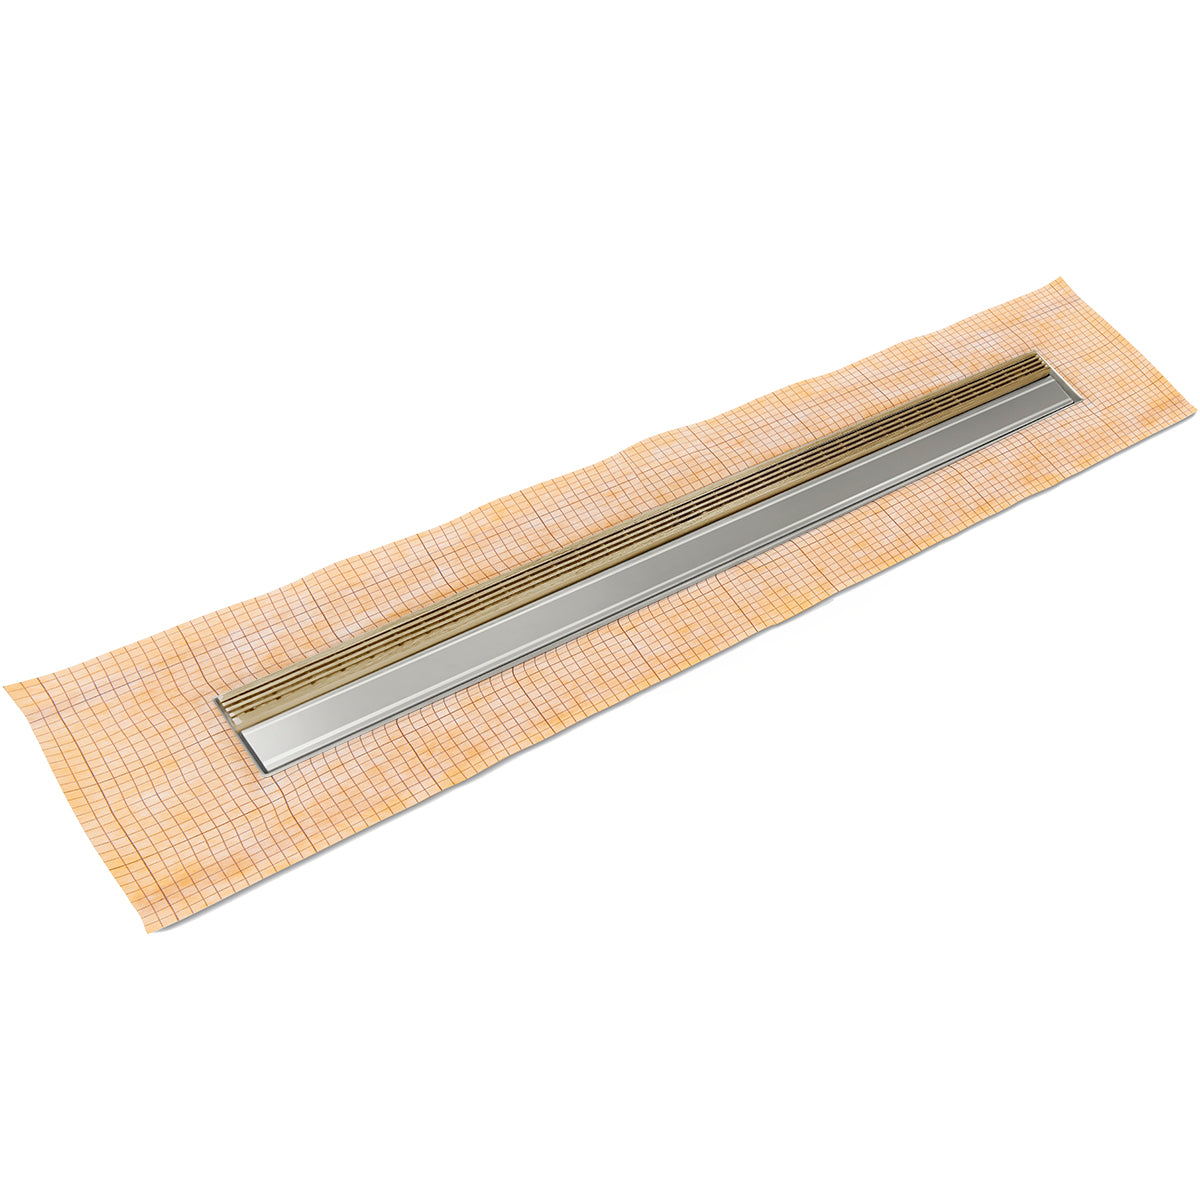 Infinity Drain 36" FCS Series Schluter-Kerdi - Fixed Flange Linear Drain Kit with 1" Wedge Wire Grate